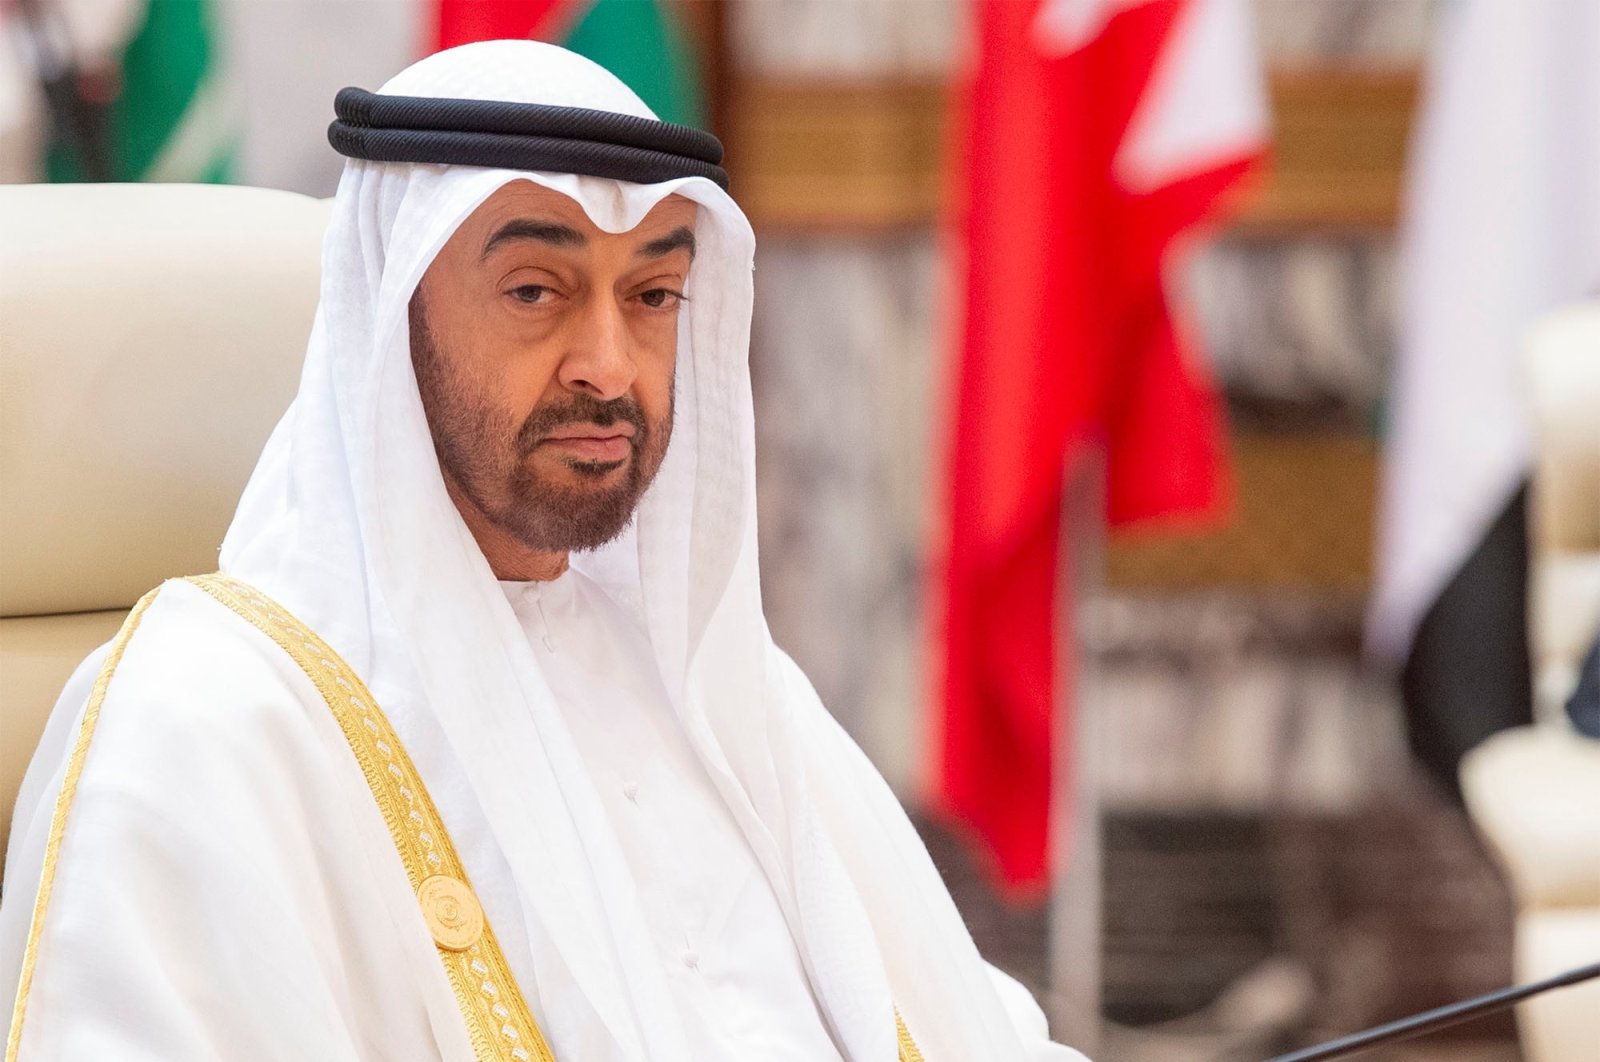 Abu Dhabi's Crown Prince Sheikh M. bin Zayed al-Nahyan attends the Gulf Cooperation Council (GCC) summit in Mecca, Saudi Arabia May 30, 2019. Picture taken May 30, 2019. (Reuters Photo)